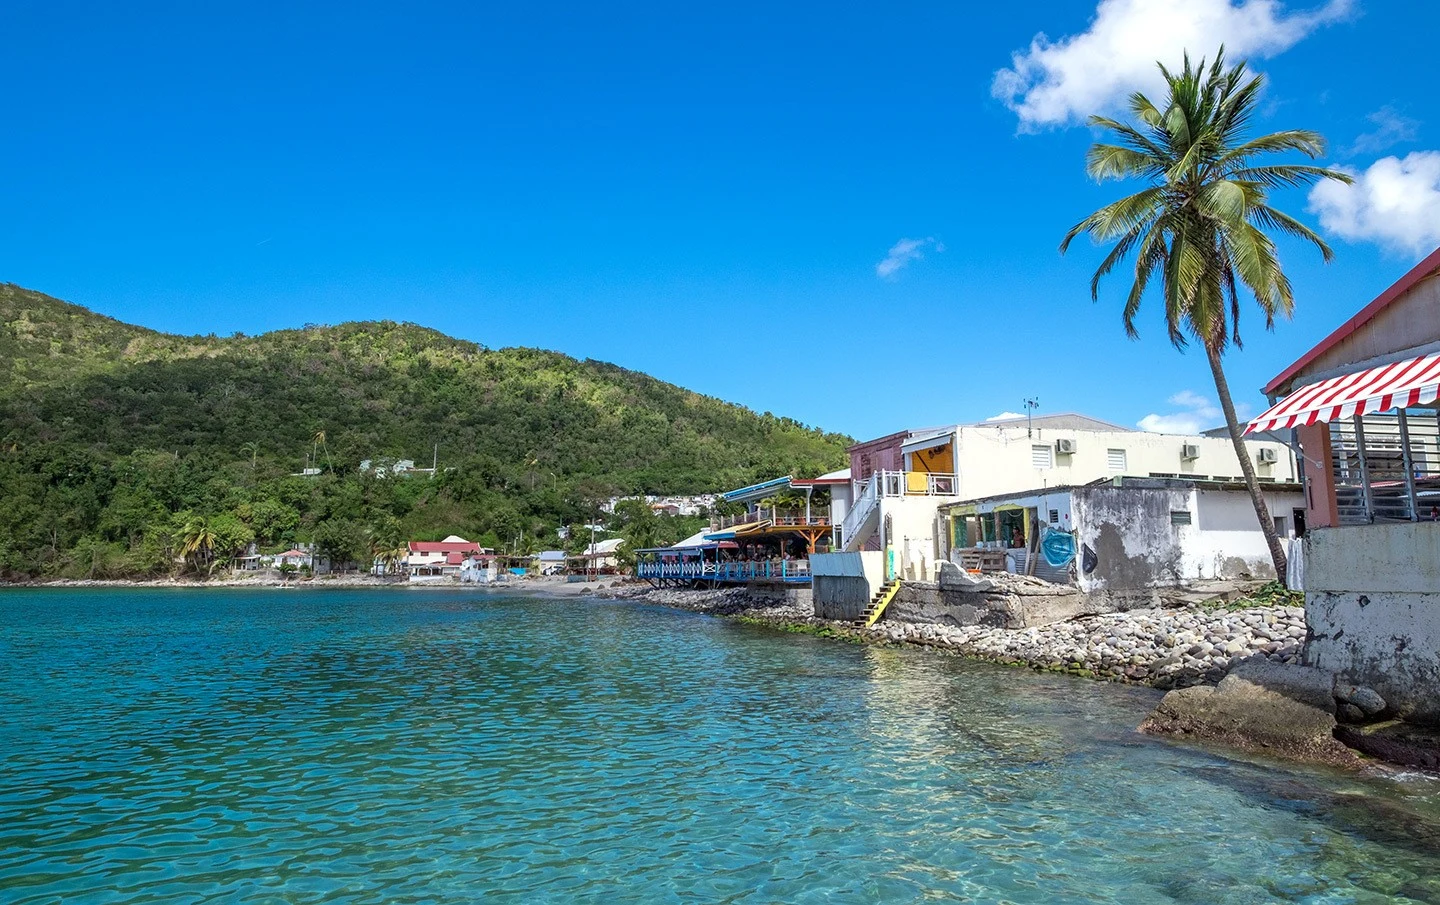 Deshaies waterfront in Basse-Terre, Guadeloupe